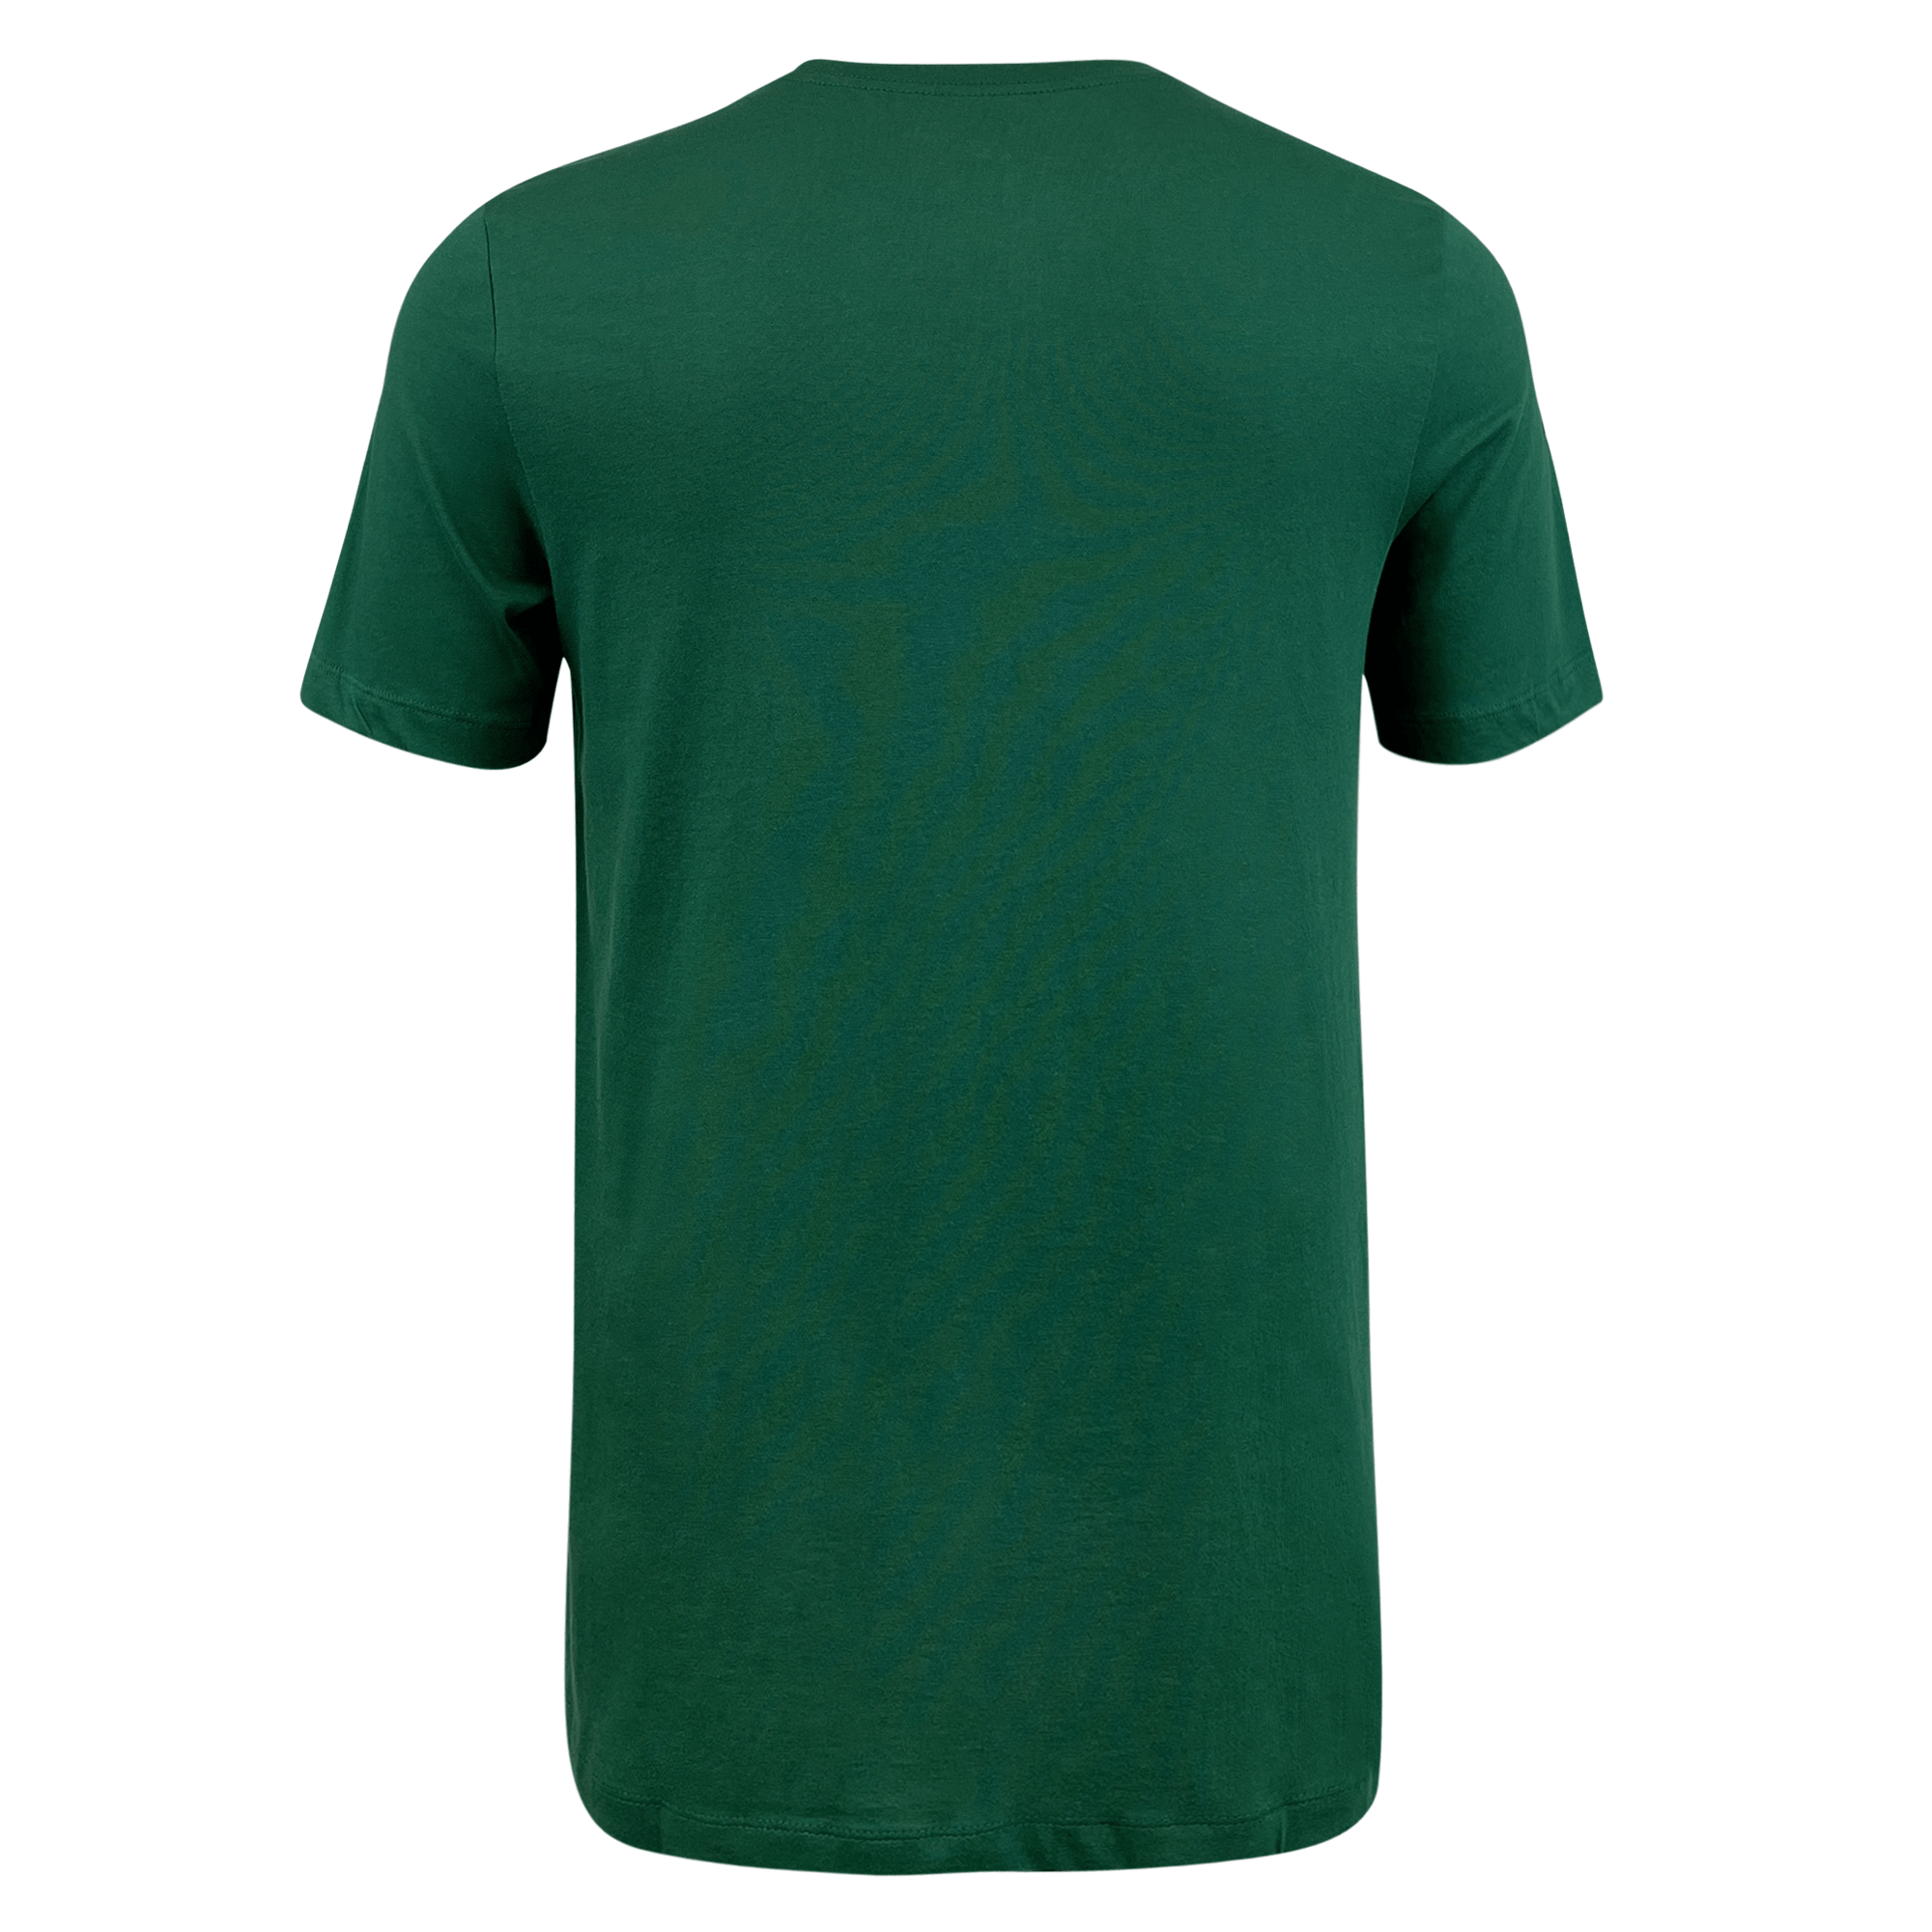 Springboks Rugby Unity T-shirt 23/24 by Nike | World Rugby Shop